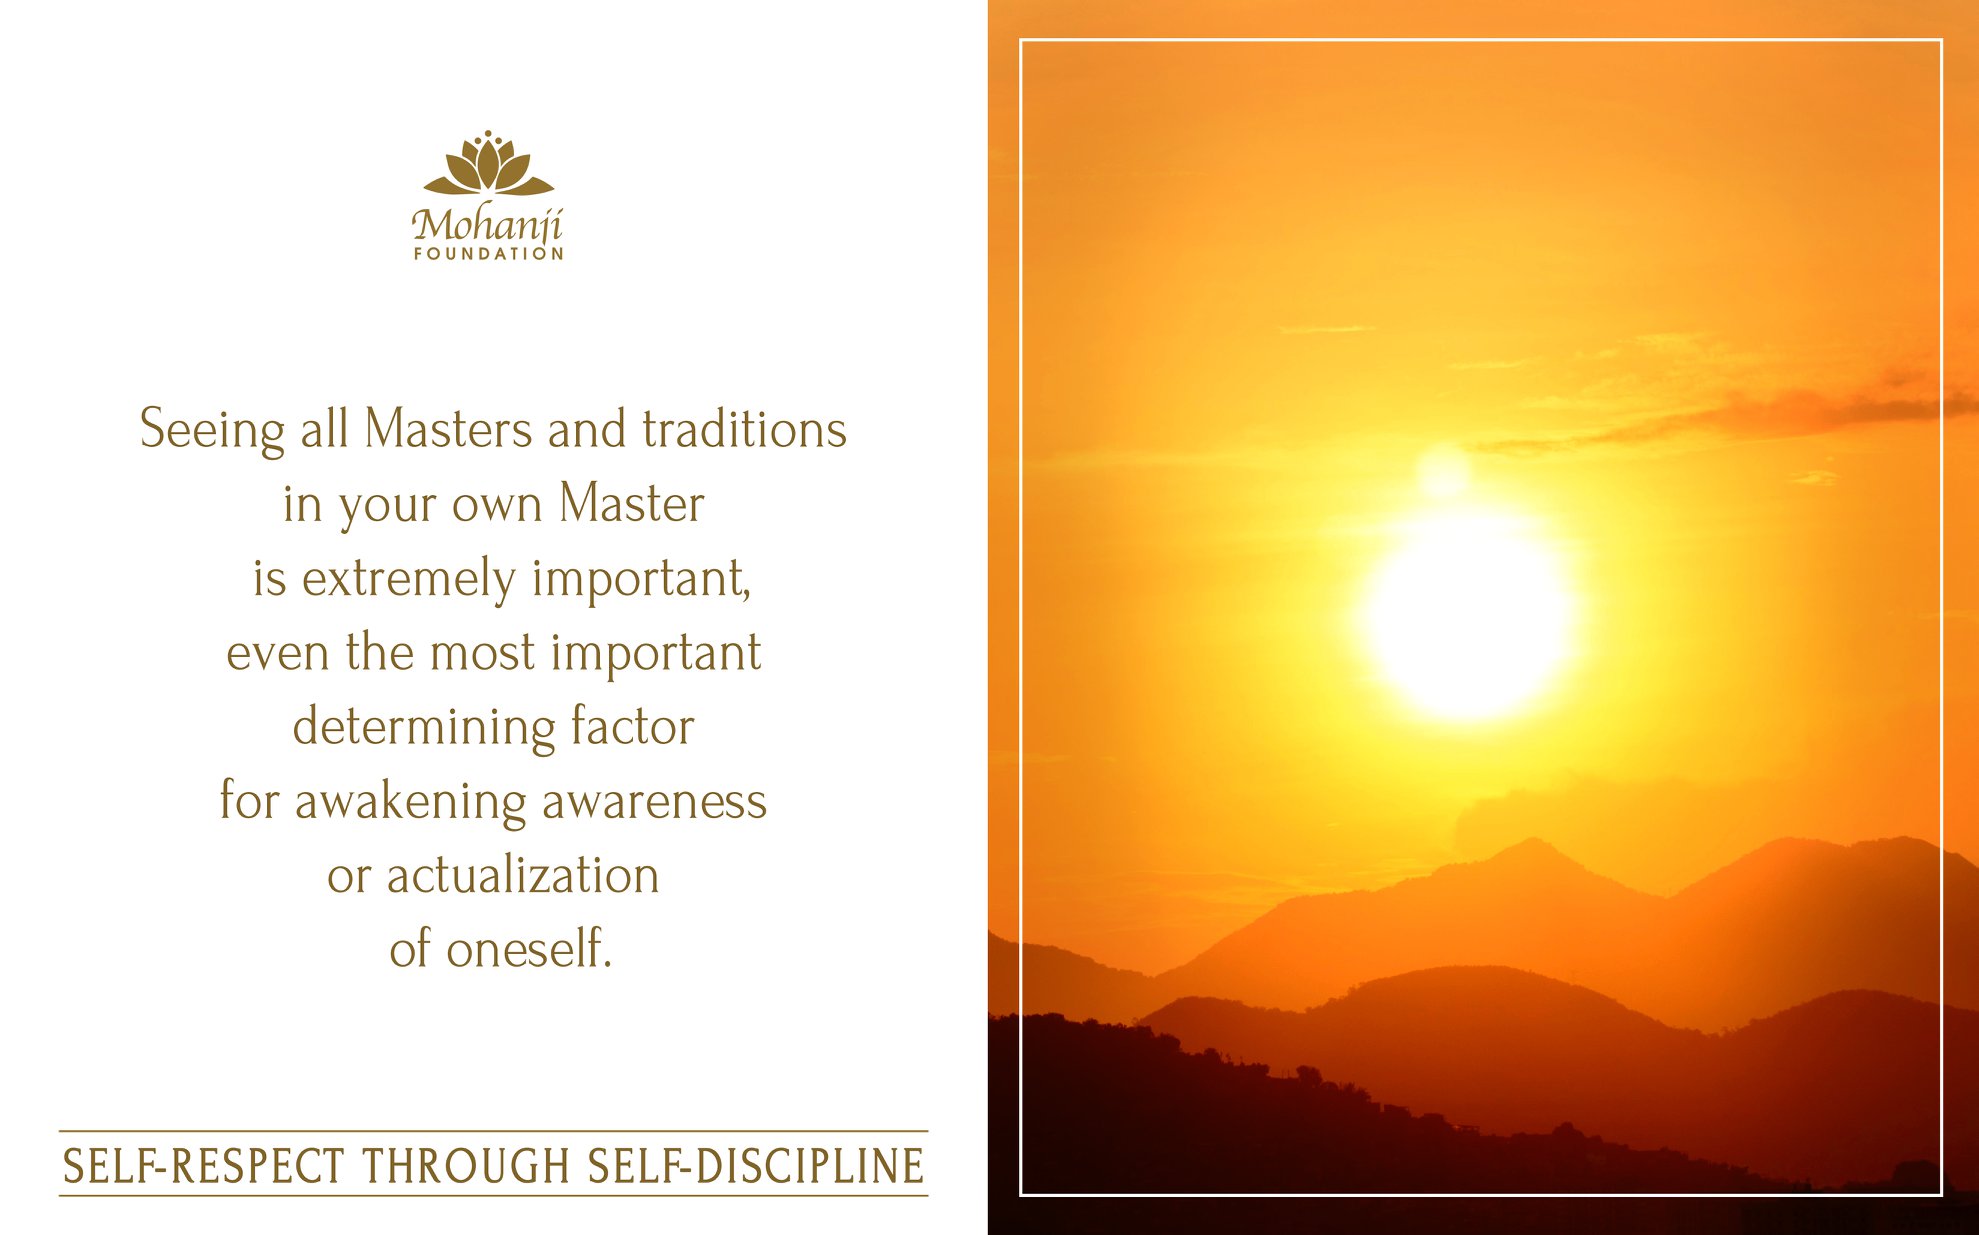 Seeing all Masters and traditions in your own Master is extremely important, even the most important determining factor for awakening awareness or actualization of oneself. - Mohanji